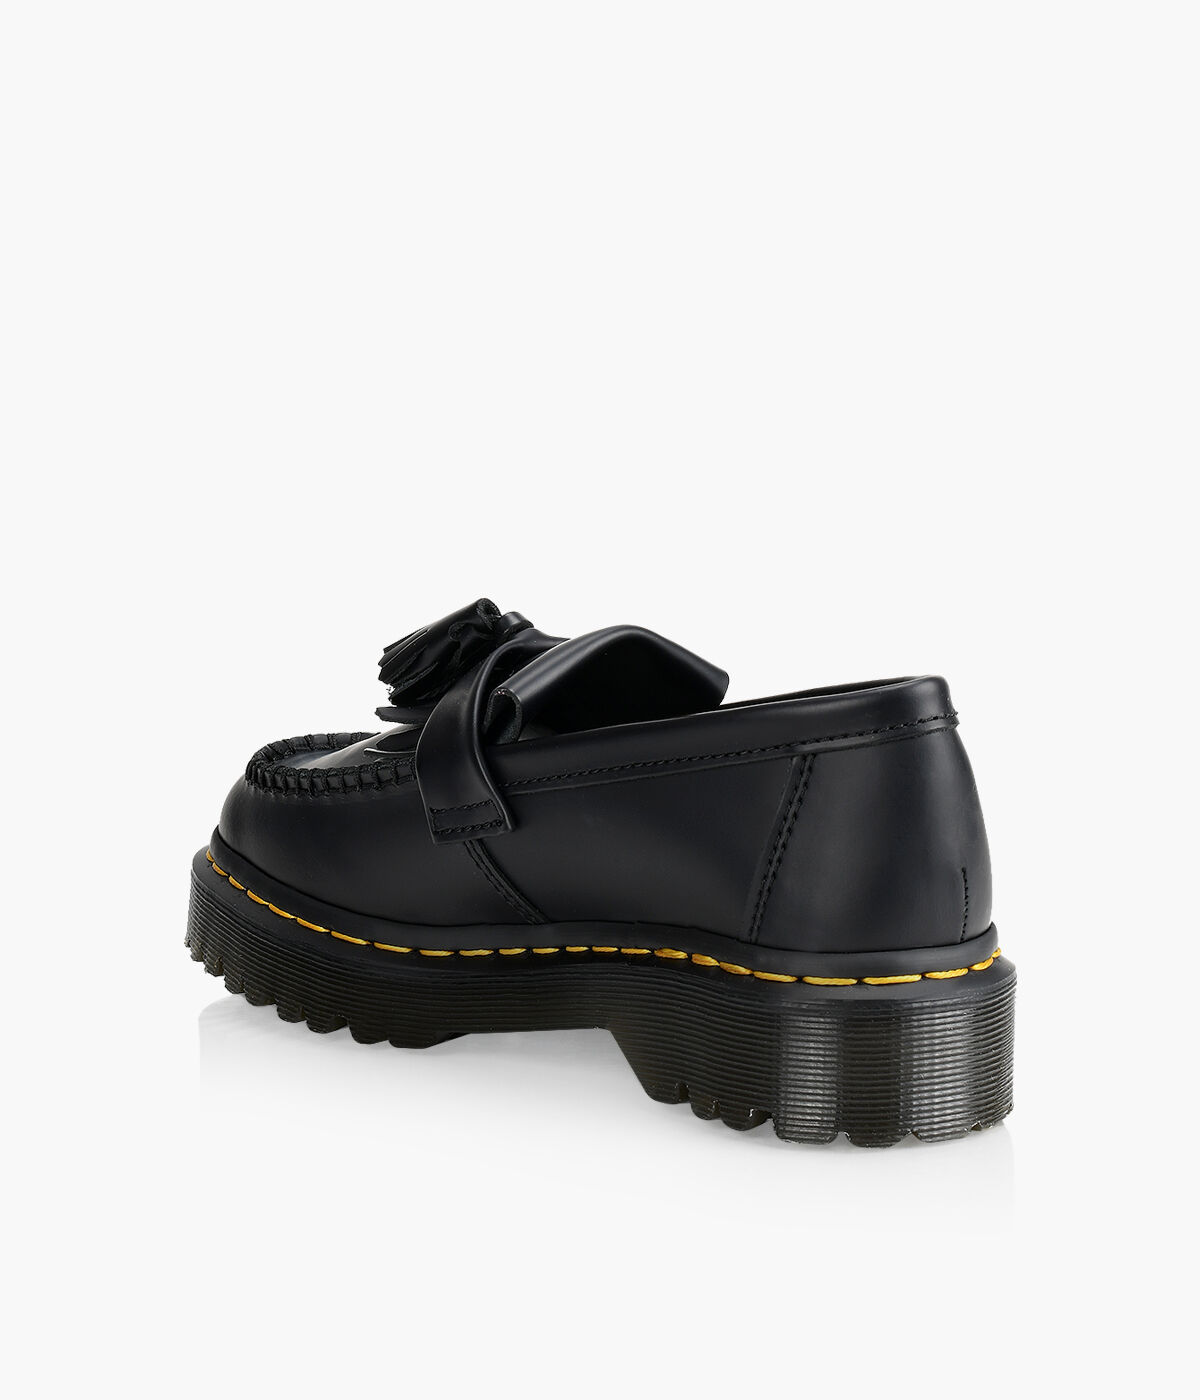 DR. MARTENS ADRIAN BEX - Black Leather | Browns Shoes